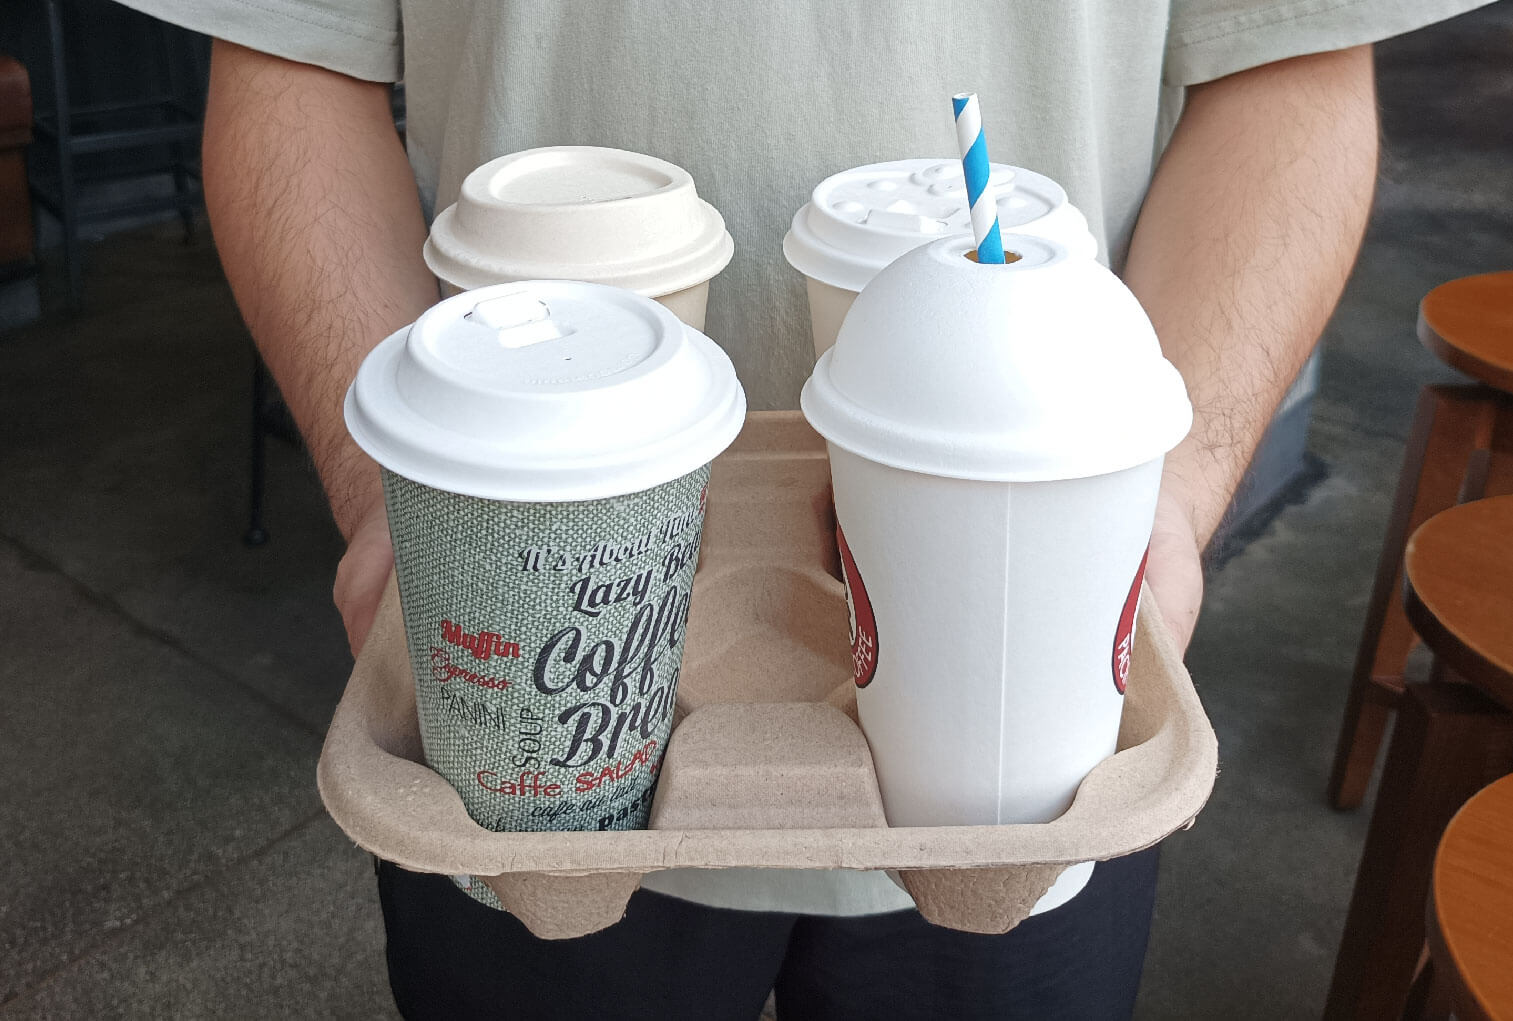 How to order biodegradable coffee lids